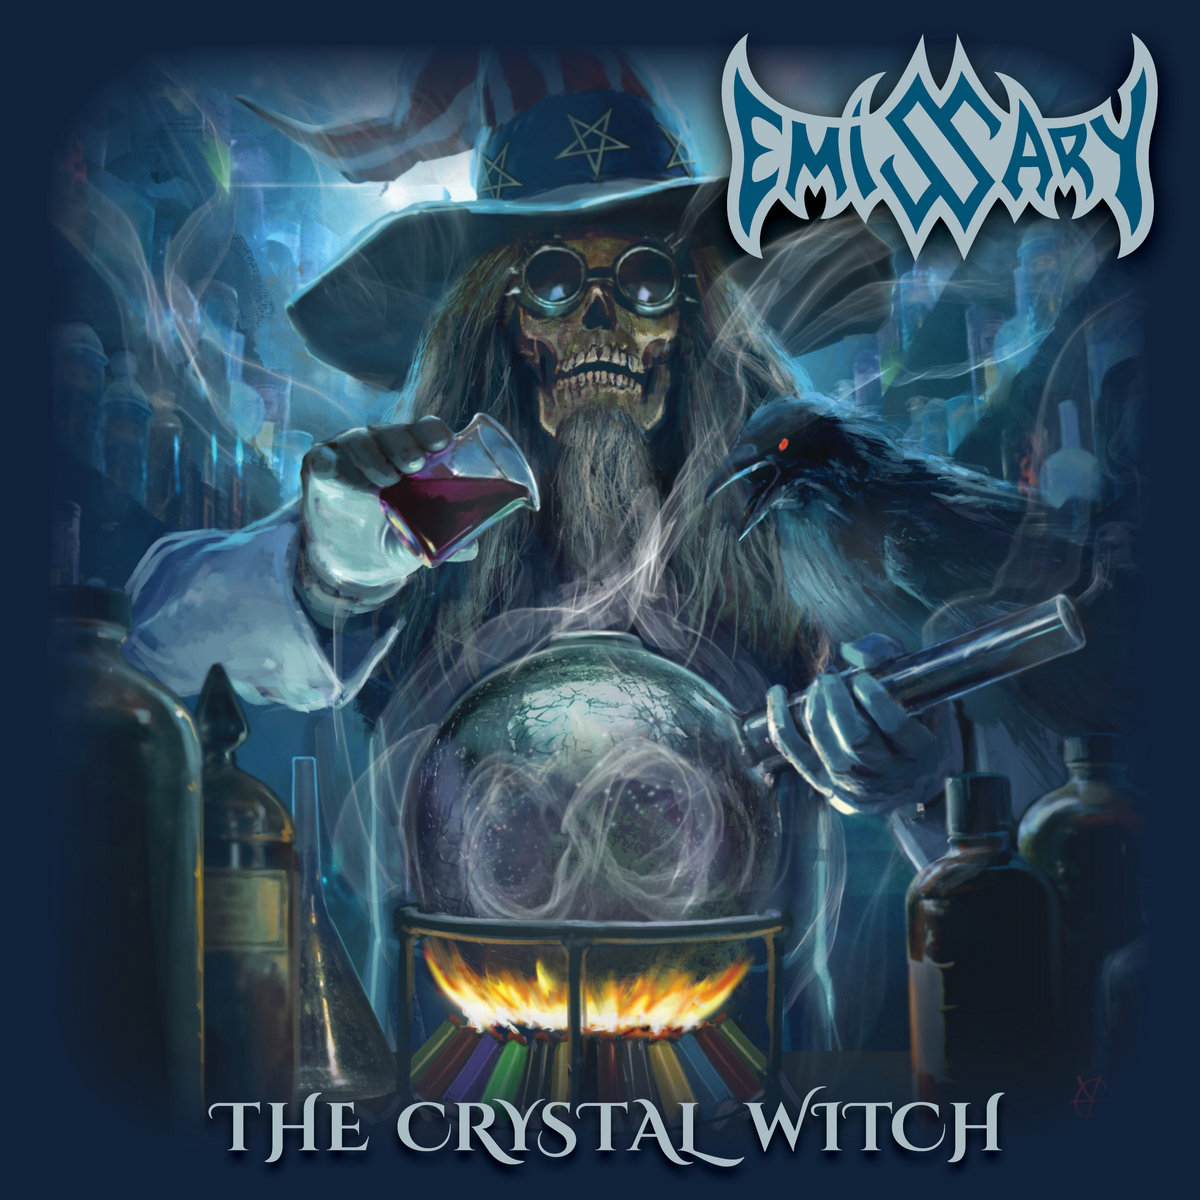 #NowPlaying 'The Crystal Witch' by Emissary on CBJRadio.com. #Worldpremier #Exclusive Listen for free at CBJRadio.com